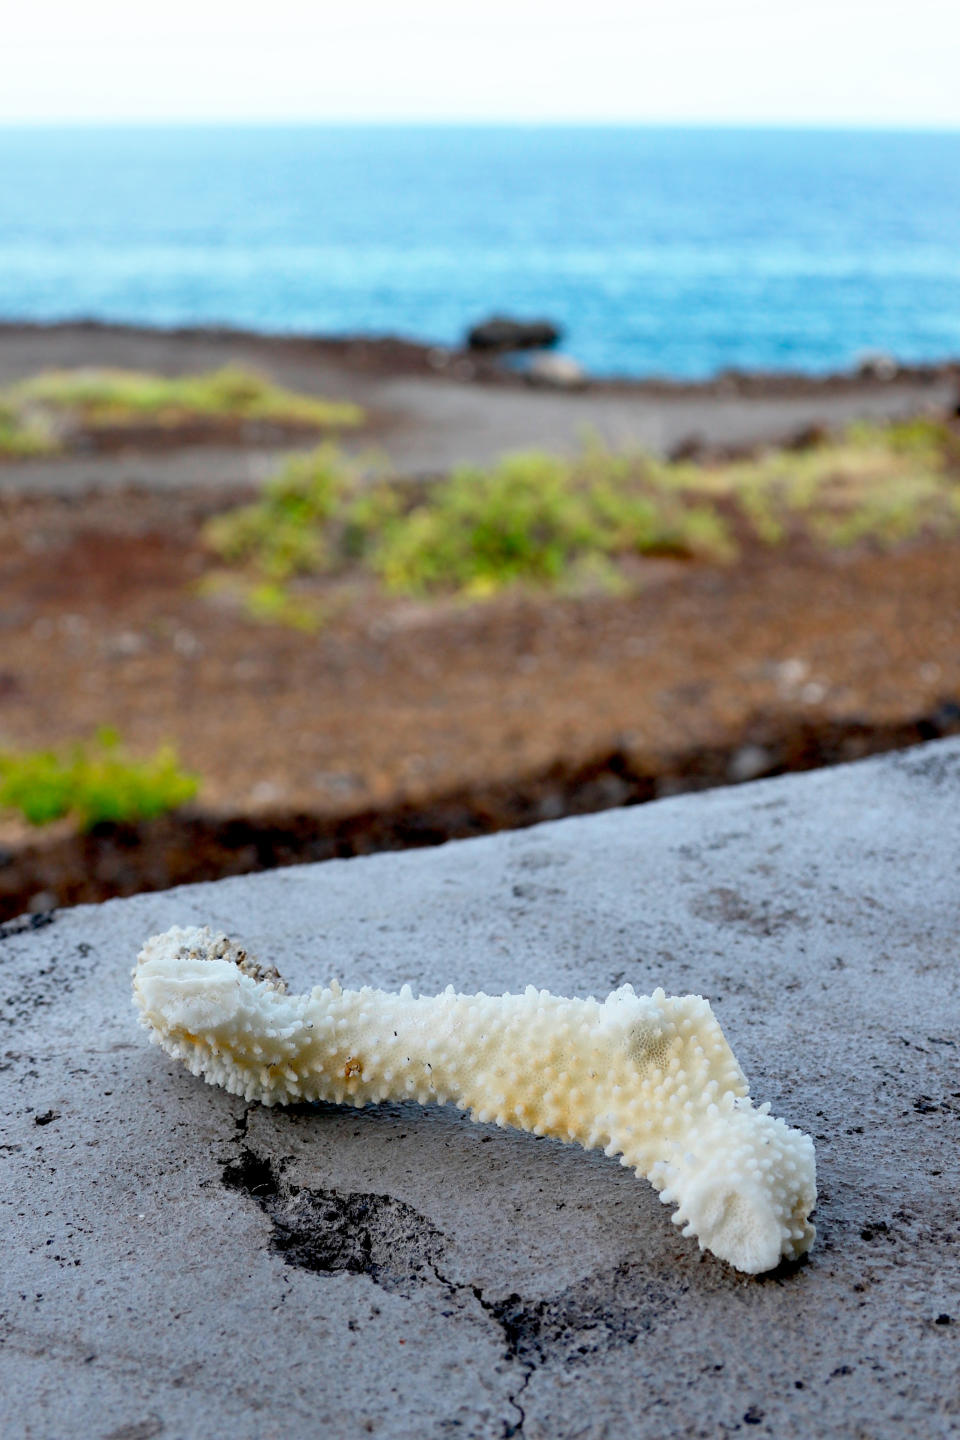 This Sept. 13, 2019 photo shows a chunk of bleached, dead coral shown on a wall near a bay on the west coast of the Big Island near Captain Cook, Hawaii. Coral reefs are vital around the world as they not only provide a habitat for fish _ the base of the marine food chain _ but food and medicine for humans. They also create an essential shoreline barrier that breaks apart large ocean swells and protects densely populated shorelines from storm surges during hurricanes. (AP Photo/Caleb Jones)